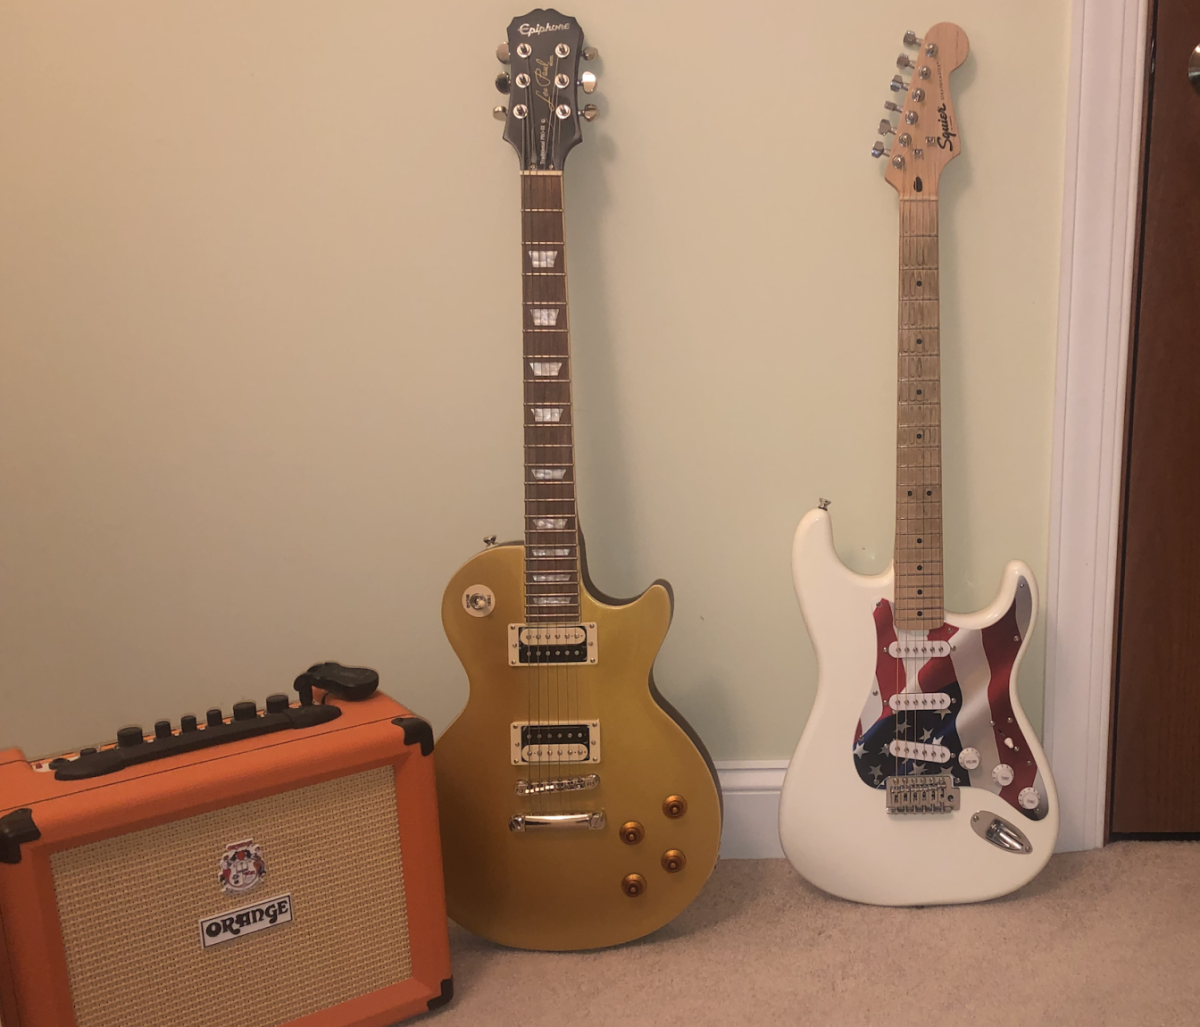 A Les Paul (Left) and modified Stratocaster (Right) sit next to an Orange brand amplifier.